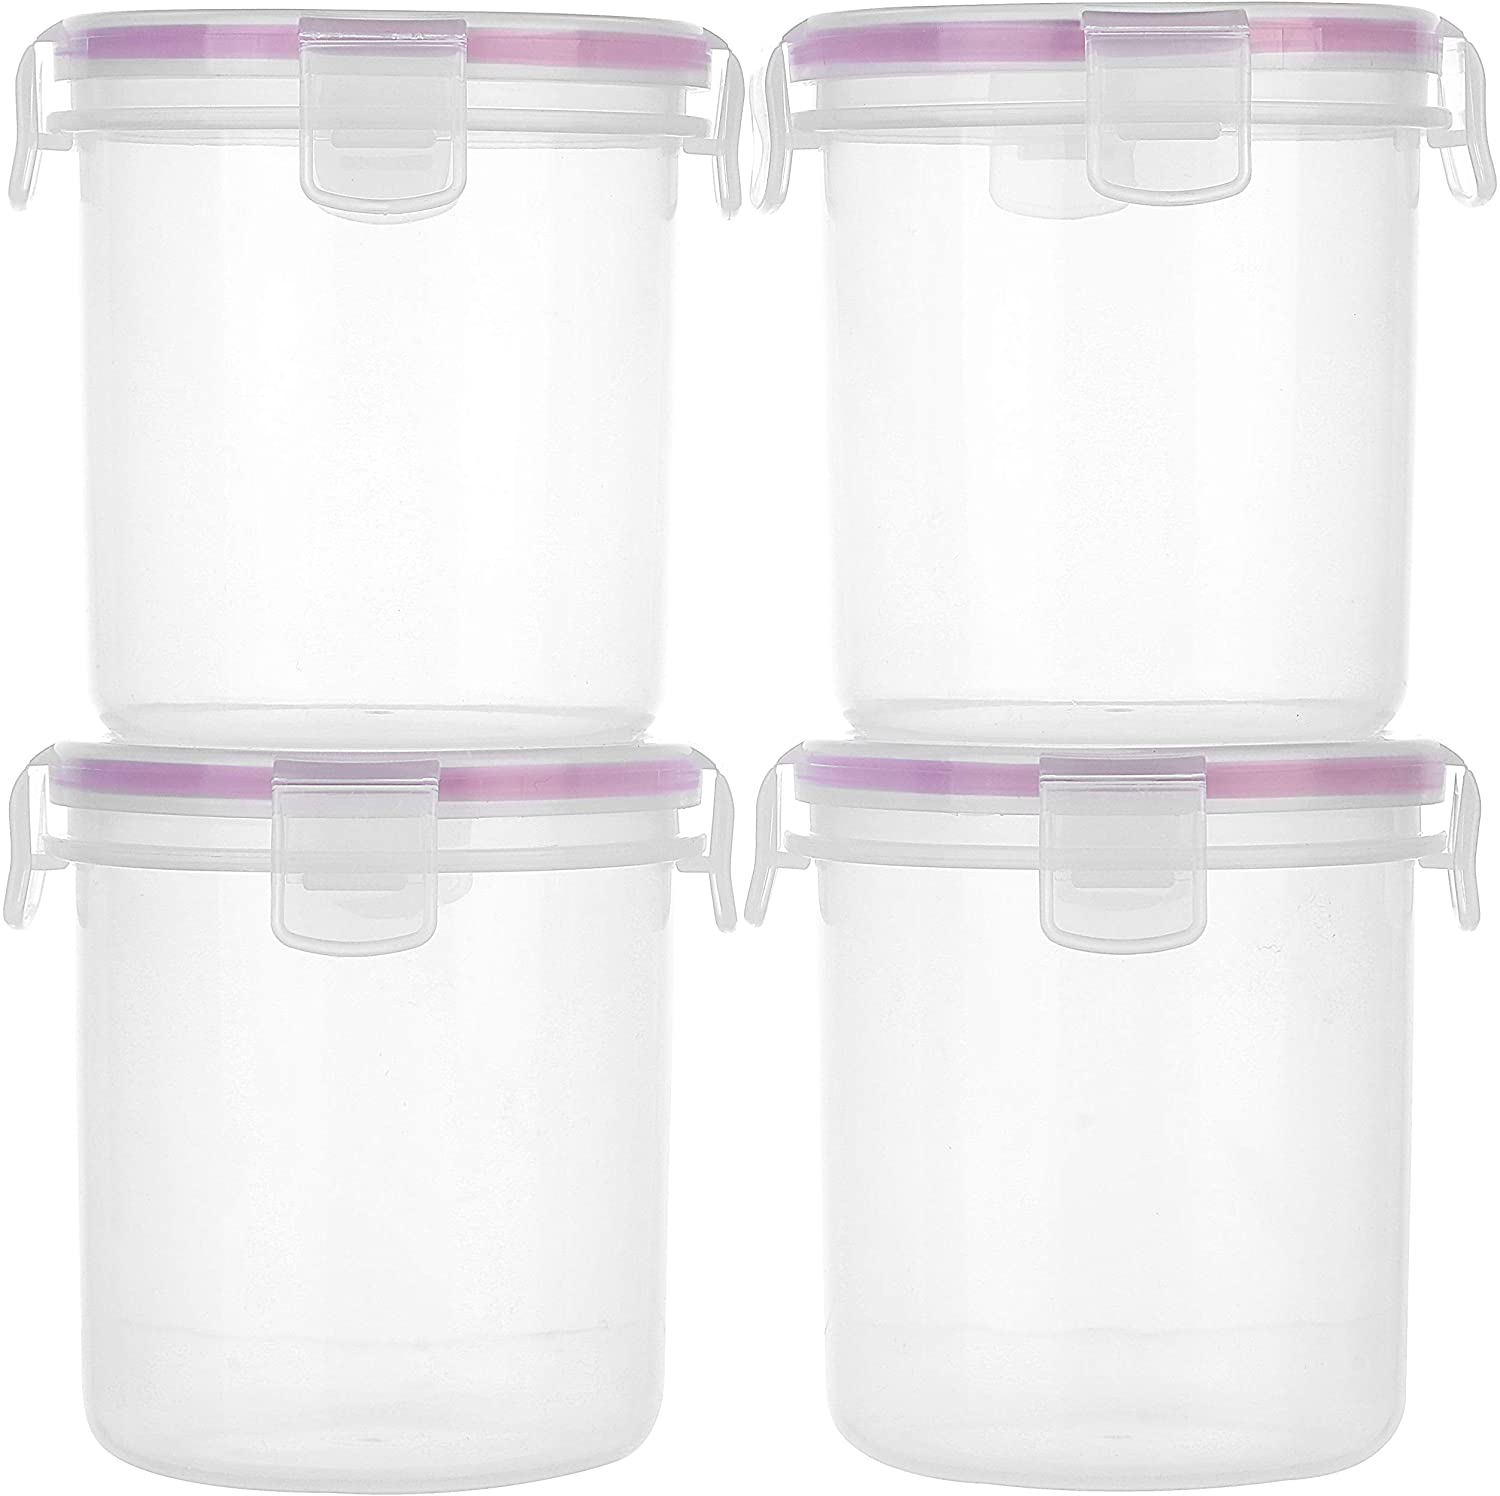 Komax, Komax Biokips Overnight Oats Containers with Lids Set of 4 Round Airtight Food Storage Containers for Oatmeal, Cereal, Milk and More BPA-Free Meal Prep Container Set w/Locking Lids (18.6 oz)